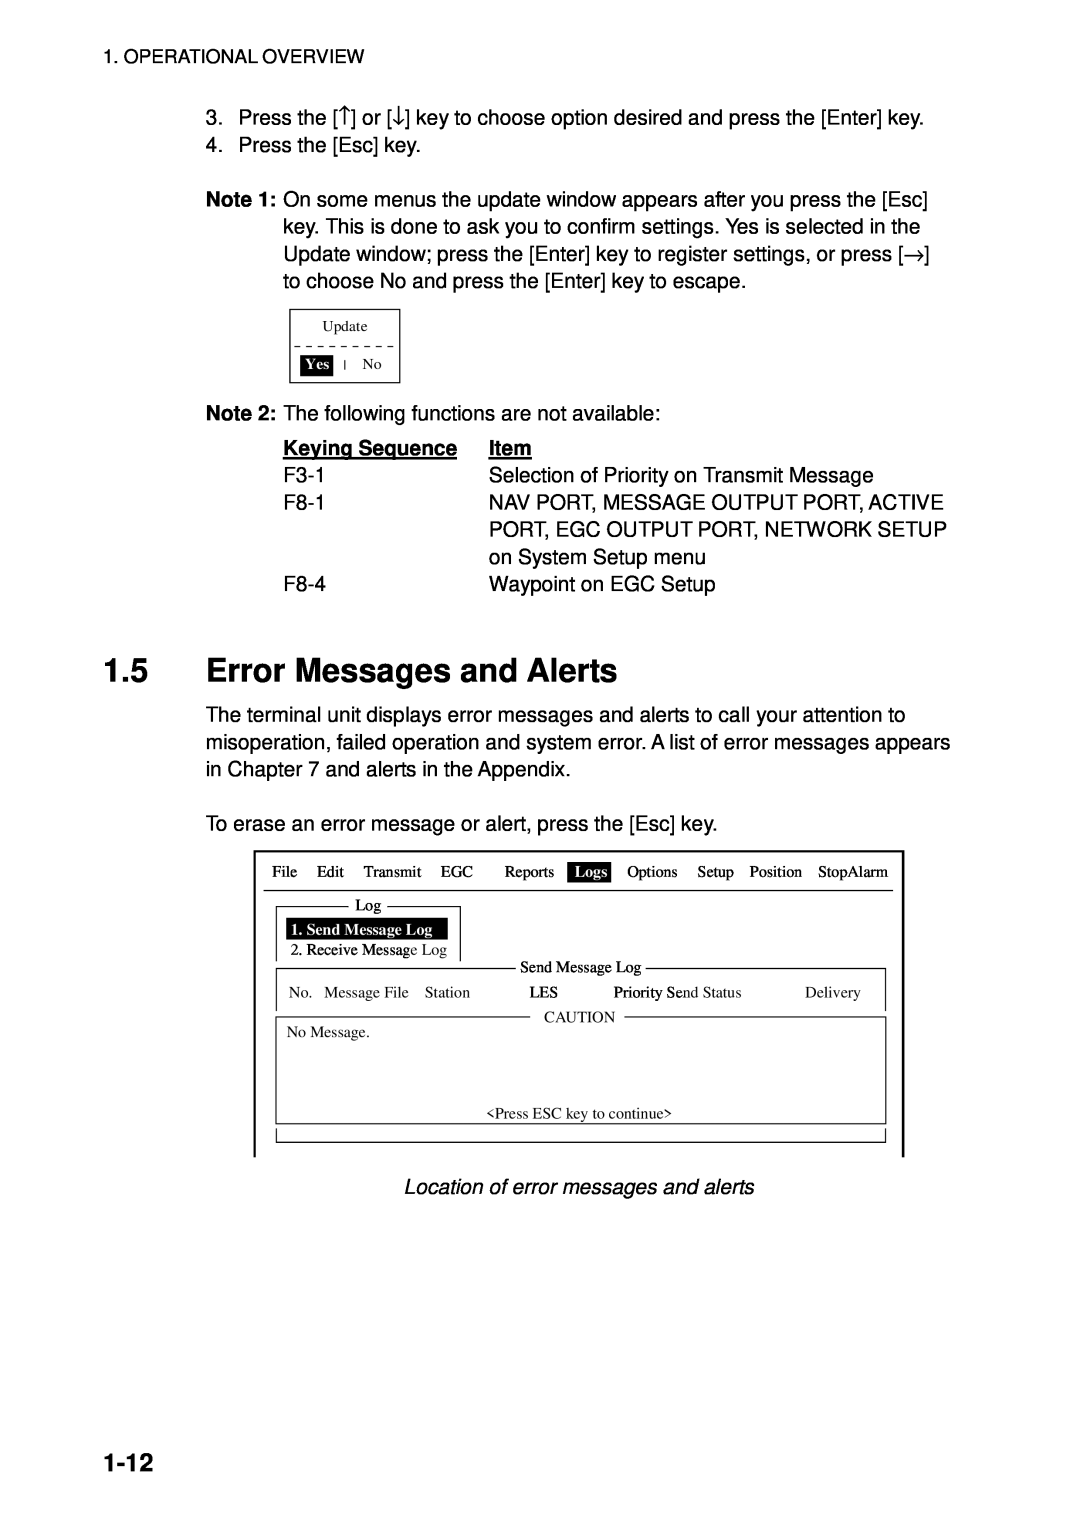 Furuno 16 manual Error Messages and Alerts, 1-12, Keying Sequence 